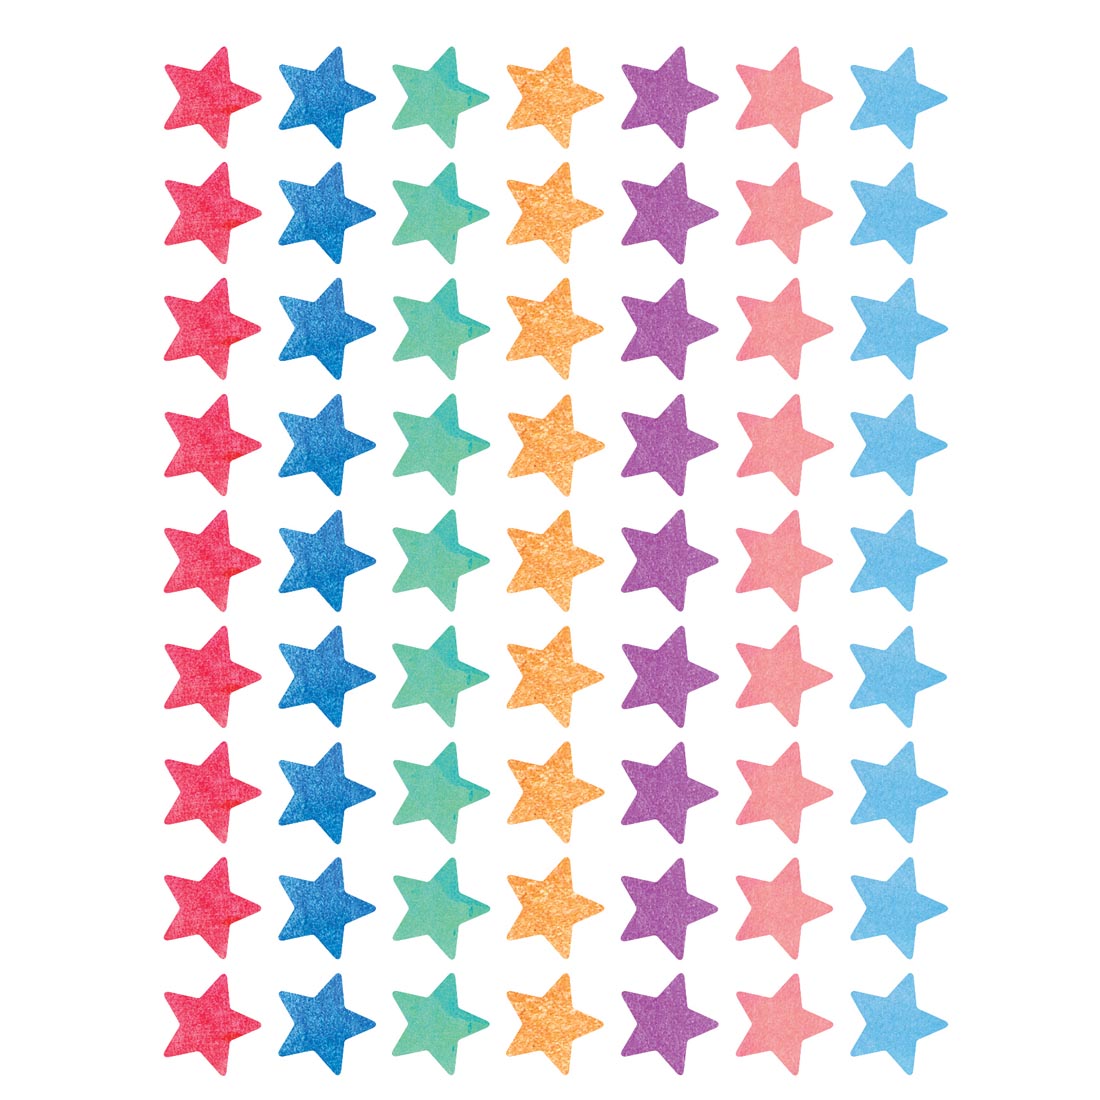 Stars Mini Stickers from the Watercolor collection by Teacher Created Resources